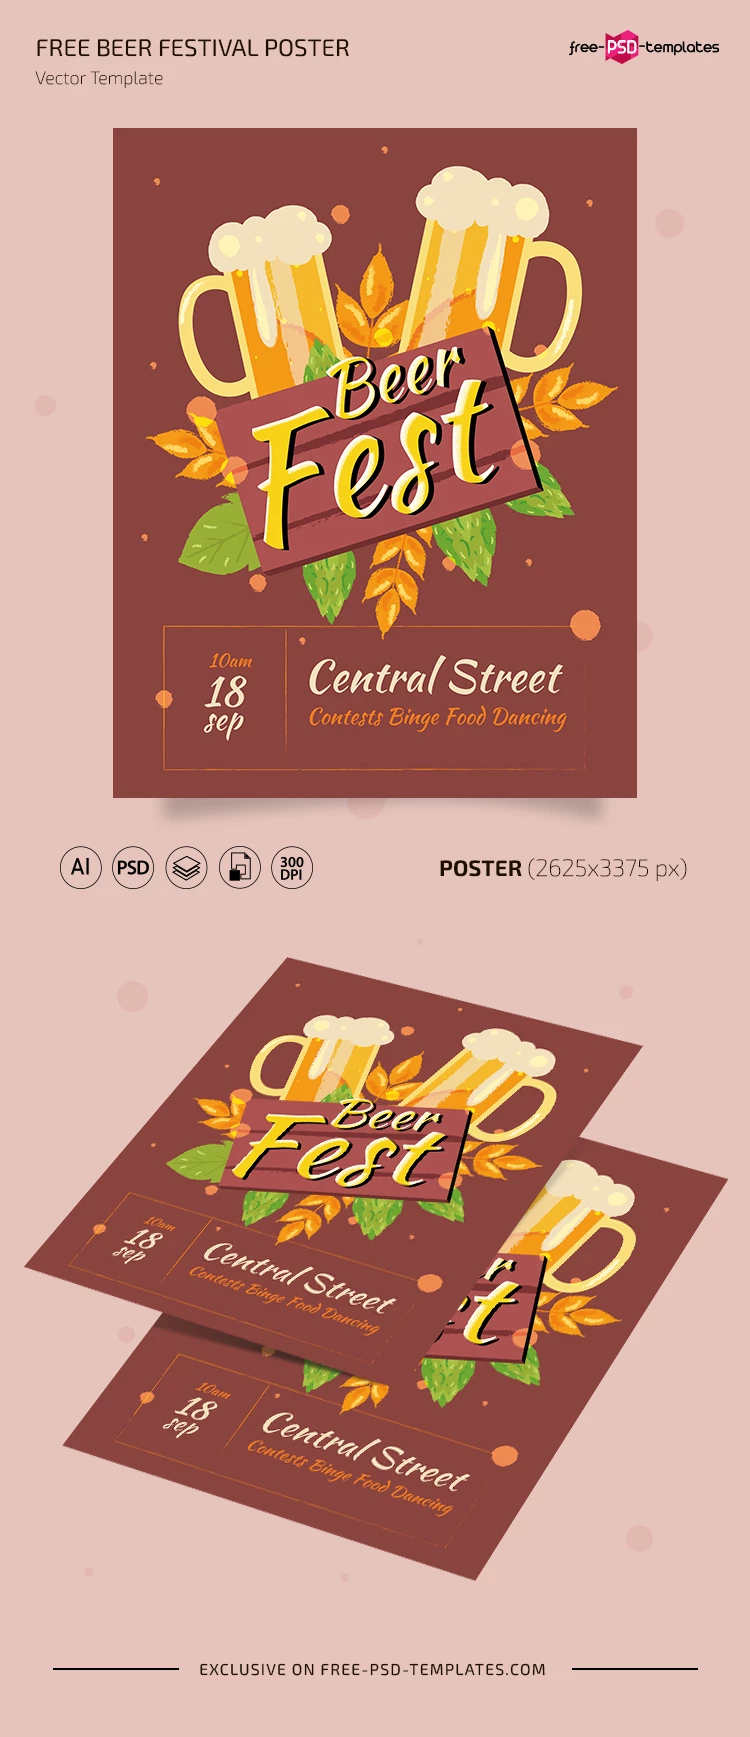 Free Beer Festival Poster PSD Template